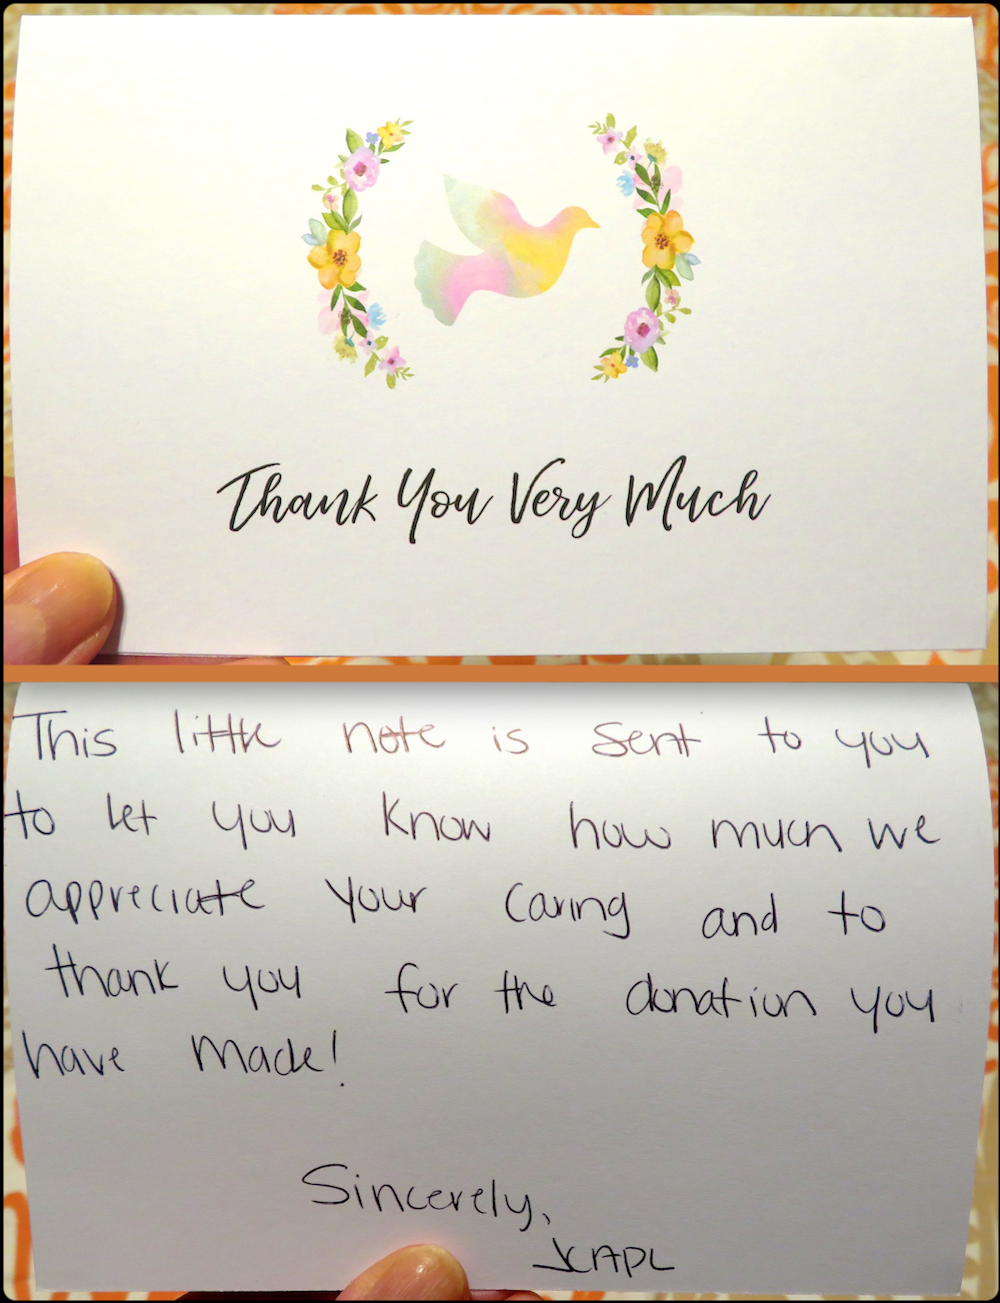 Here's a really sweet card we got from the Johnston County Animal Protection League (JCAPL) for donating 20% of our Pay It FURward concert proceeds to them.